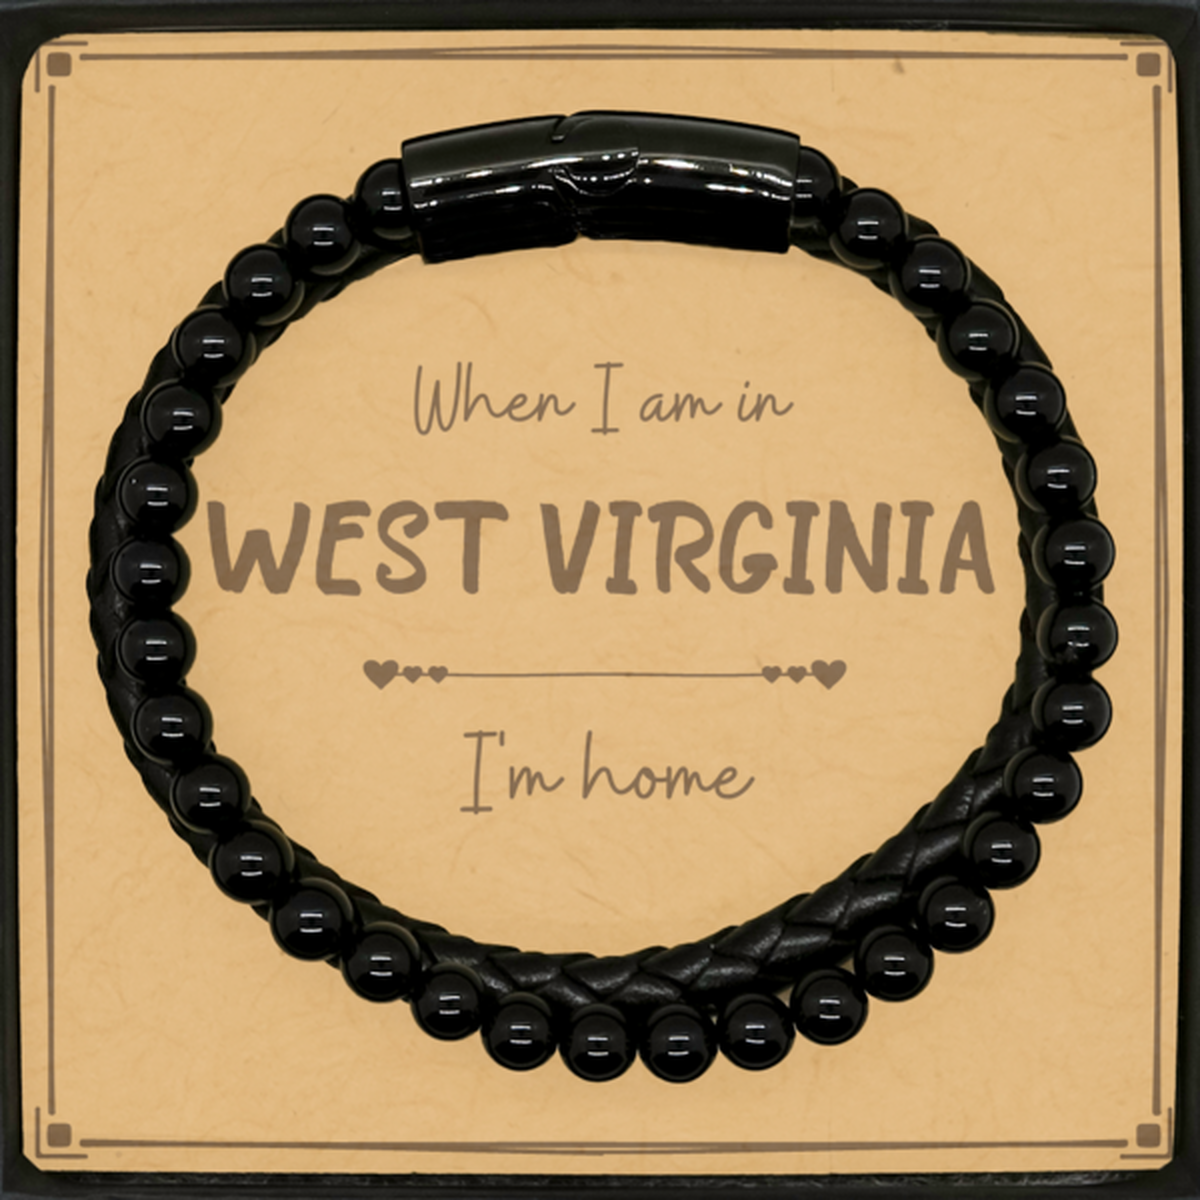 When I am in West Virginia I'm home Stone Leather Bracelets, Message Card Gifts For West Virginia, State West Virginia Birthday Gifts for Friends Coworker